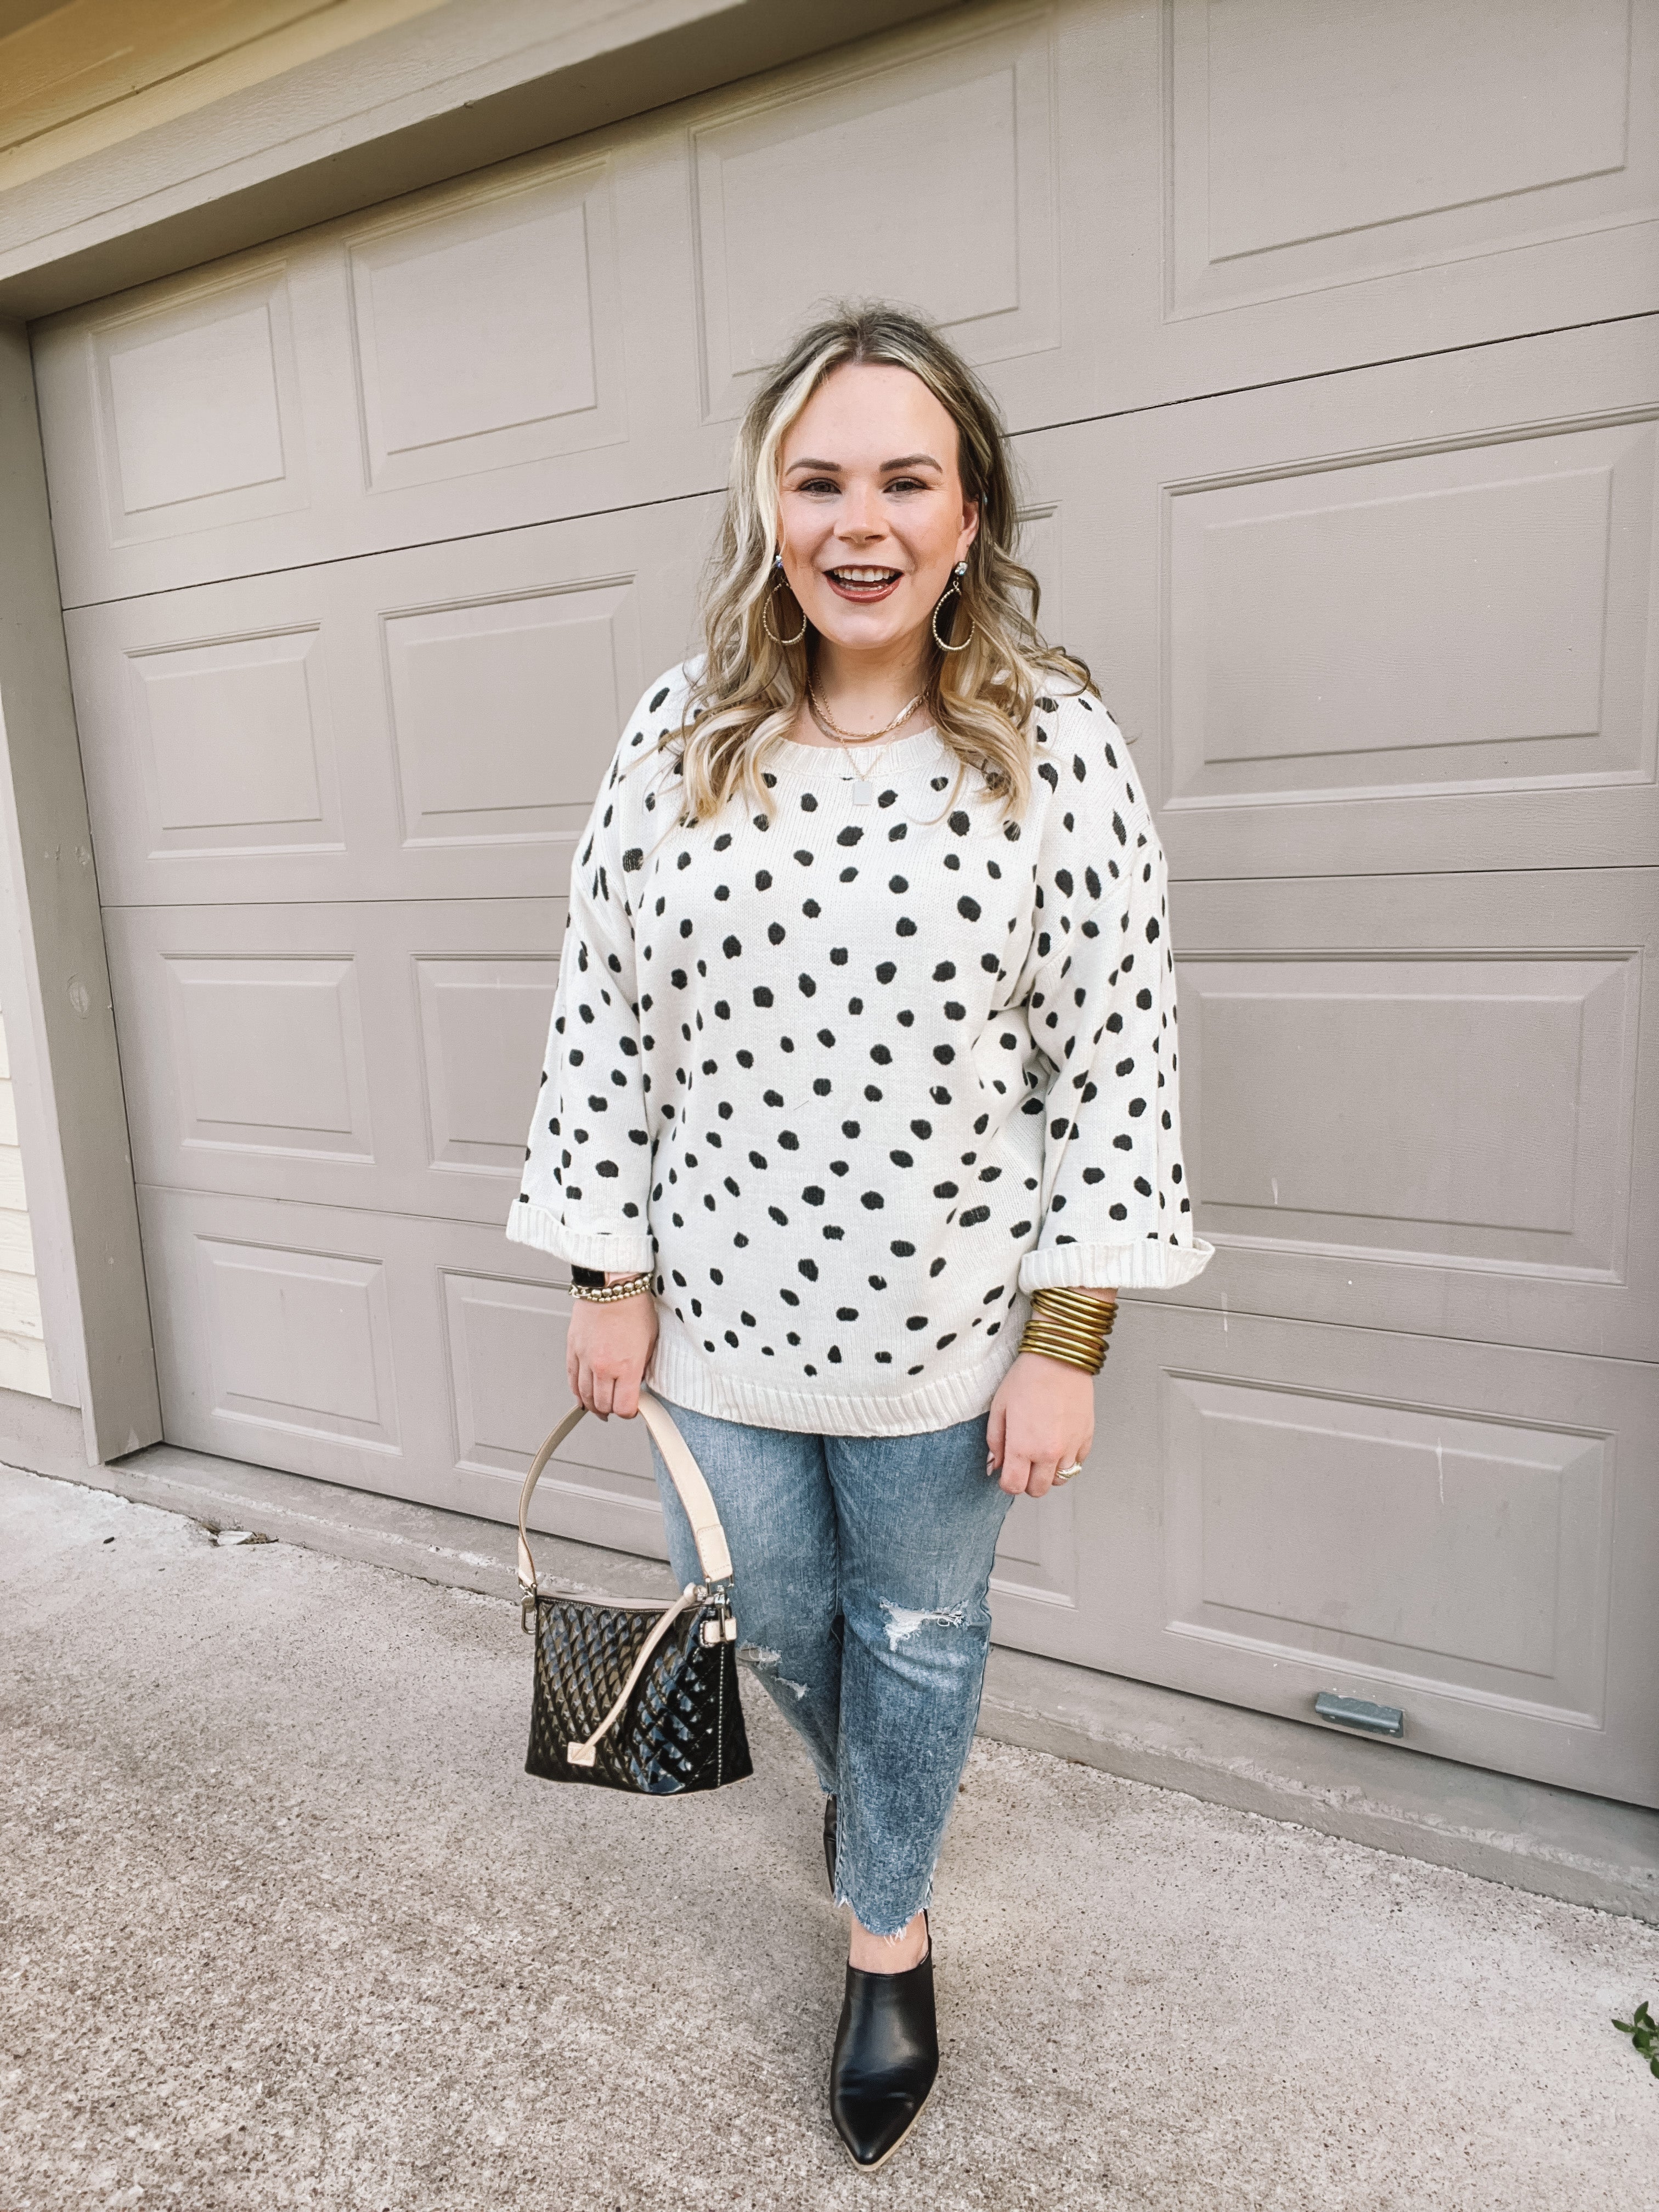 Iced Latte Love Wide 3/4 Sleeve Polka Dot Sweater in Ivory - Giddy Up Glamour Boutique